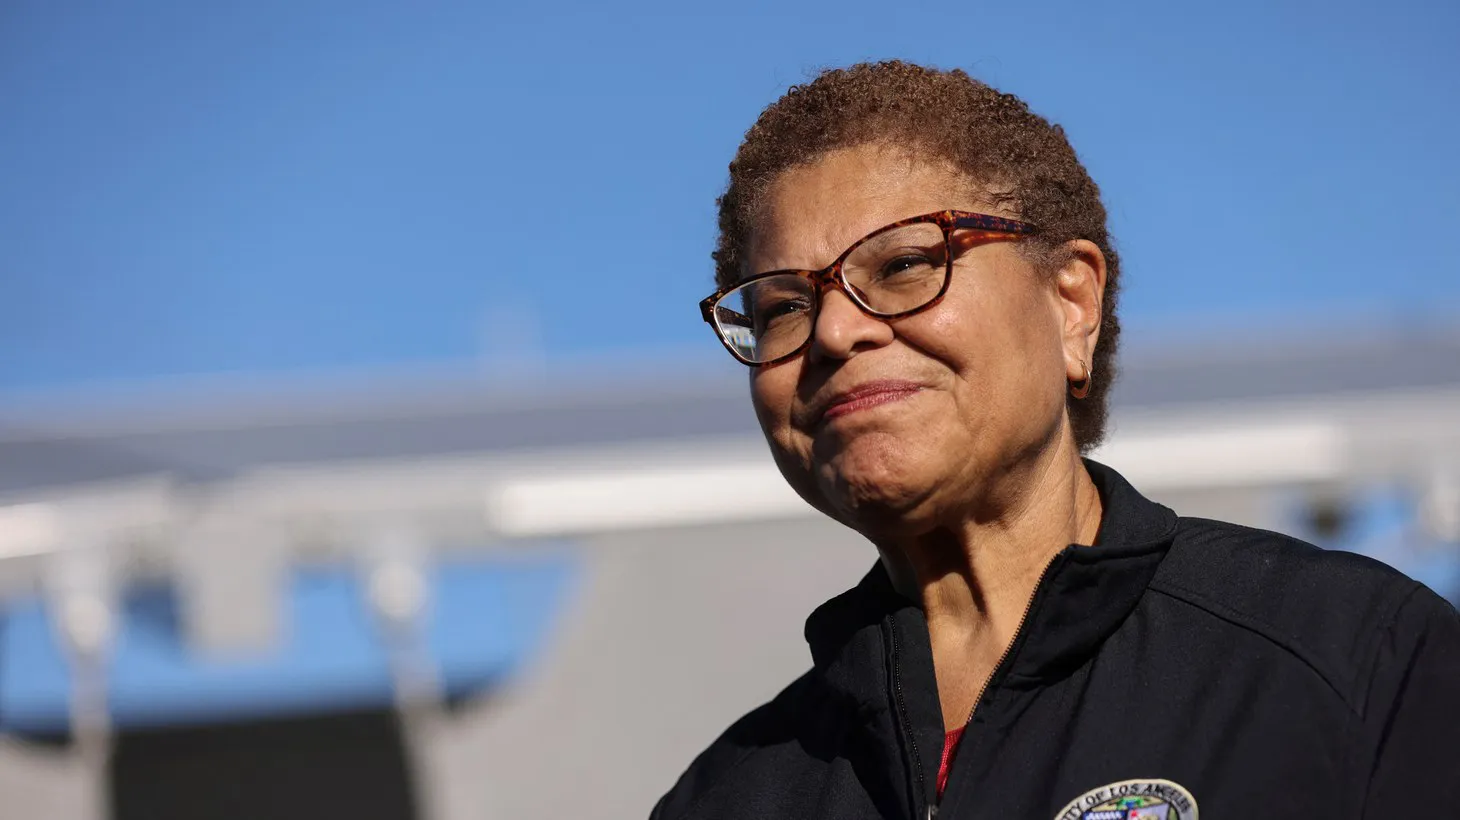 Los Angeles Mayor Karen Bass looks on during a visit to the Hilda L. Solis Care First Village to see the interim housing built from shipping containers in Los Angeles, California, U.S., February 7, 2023.